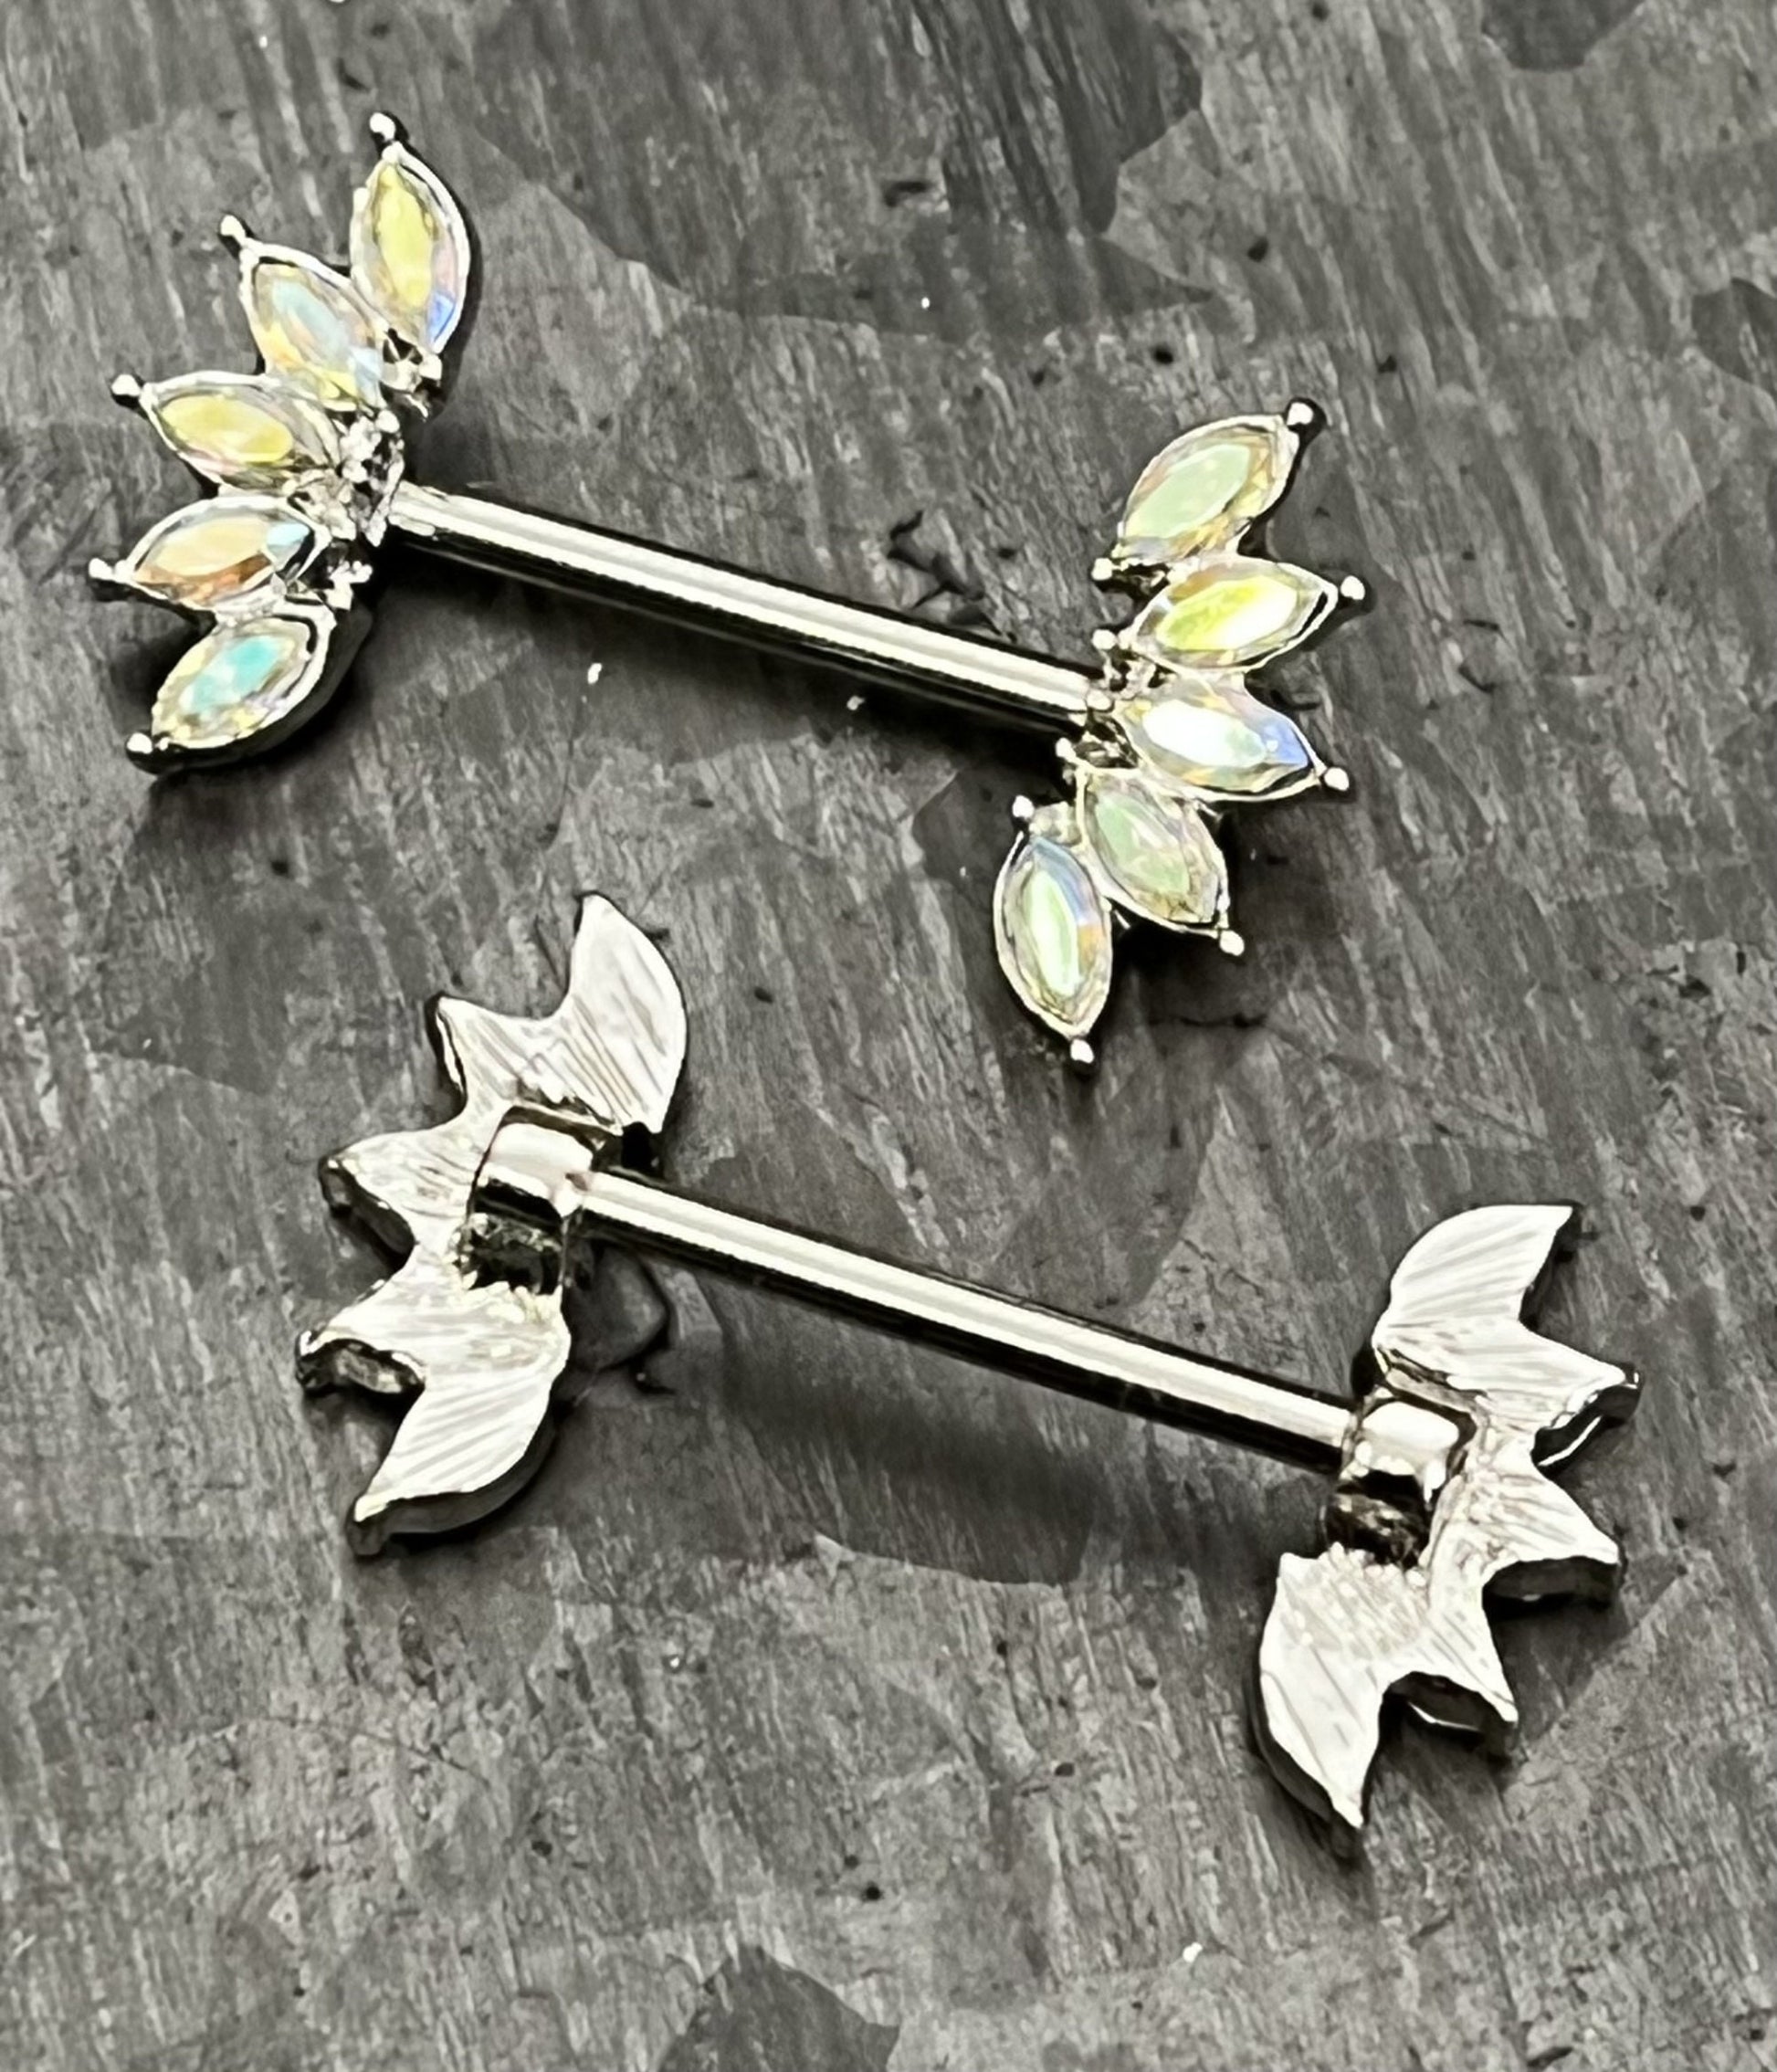 PAIR of Stunning Marquise Crystal Gem Fans Steel Nipple Barbells/Rings - 14g, 12mm Wearable Length in Aurora Borealis, Clear & Pink!